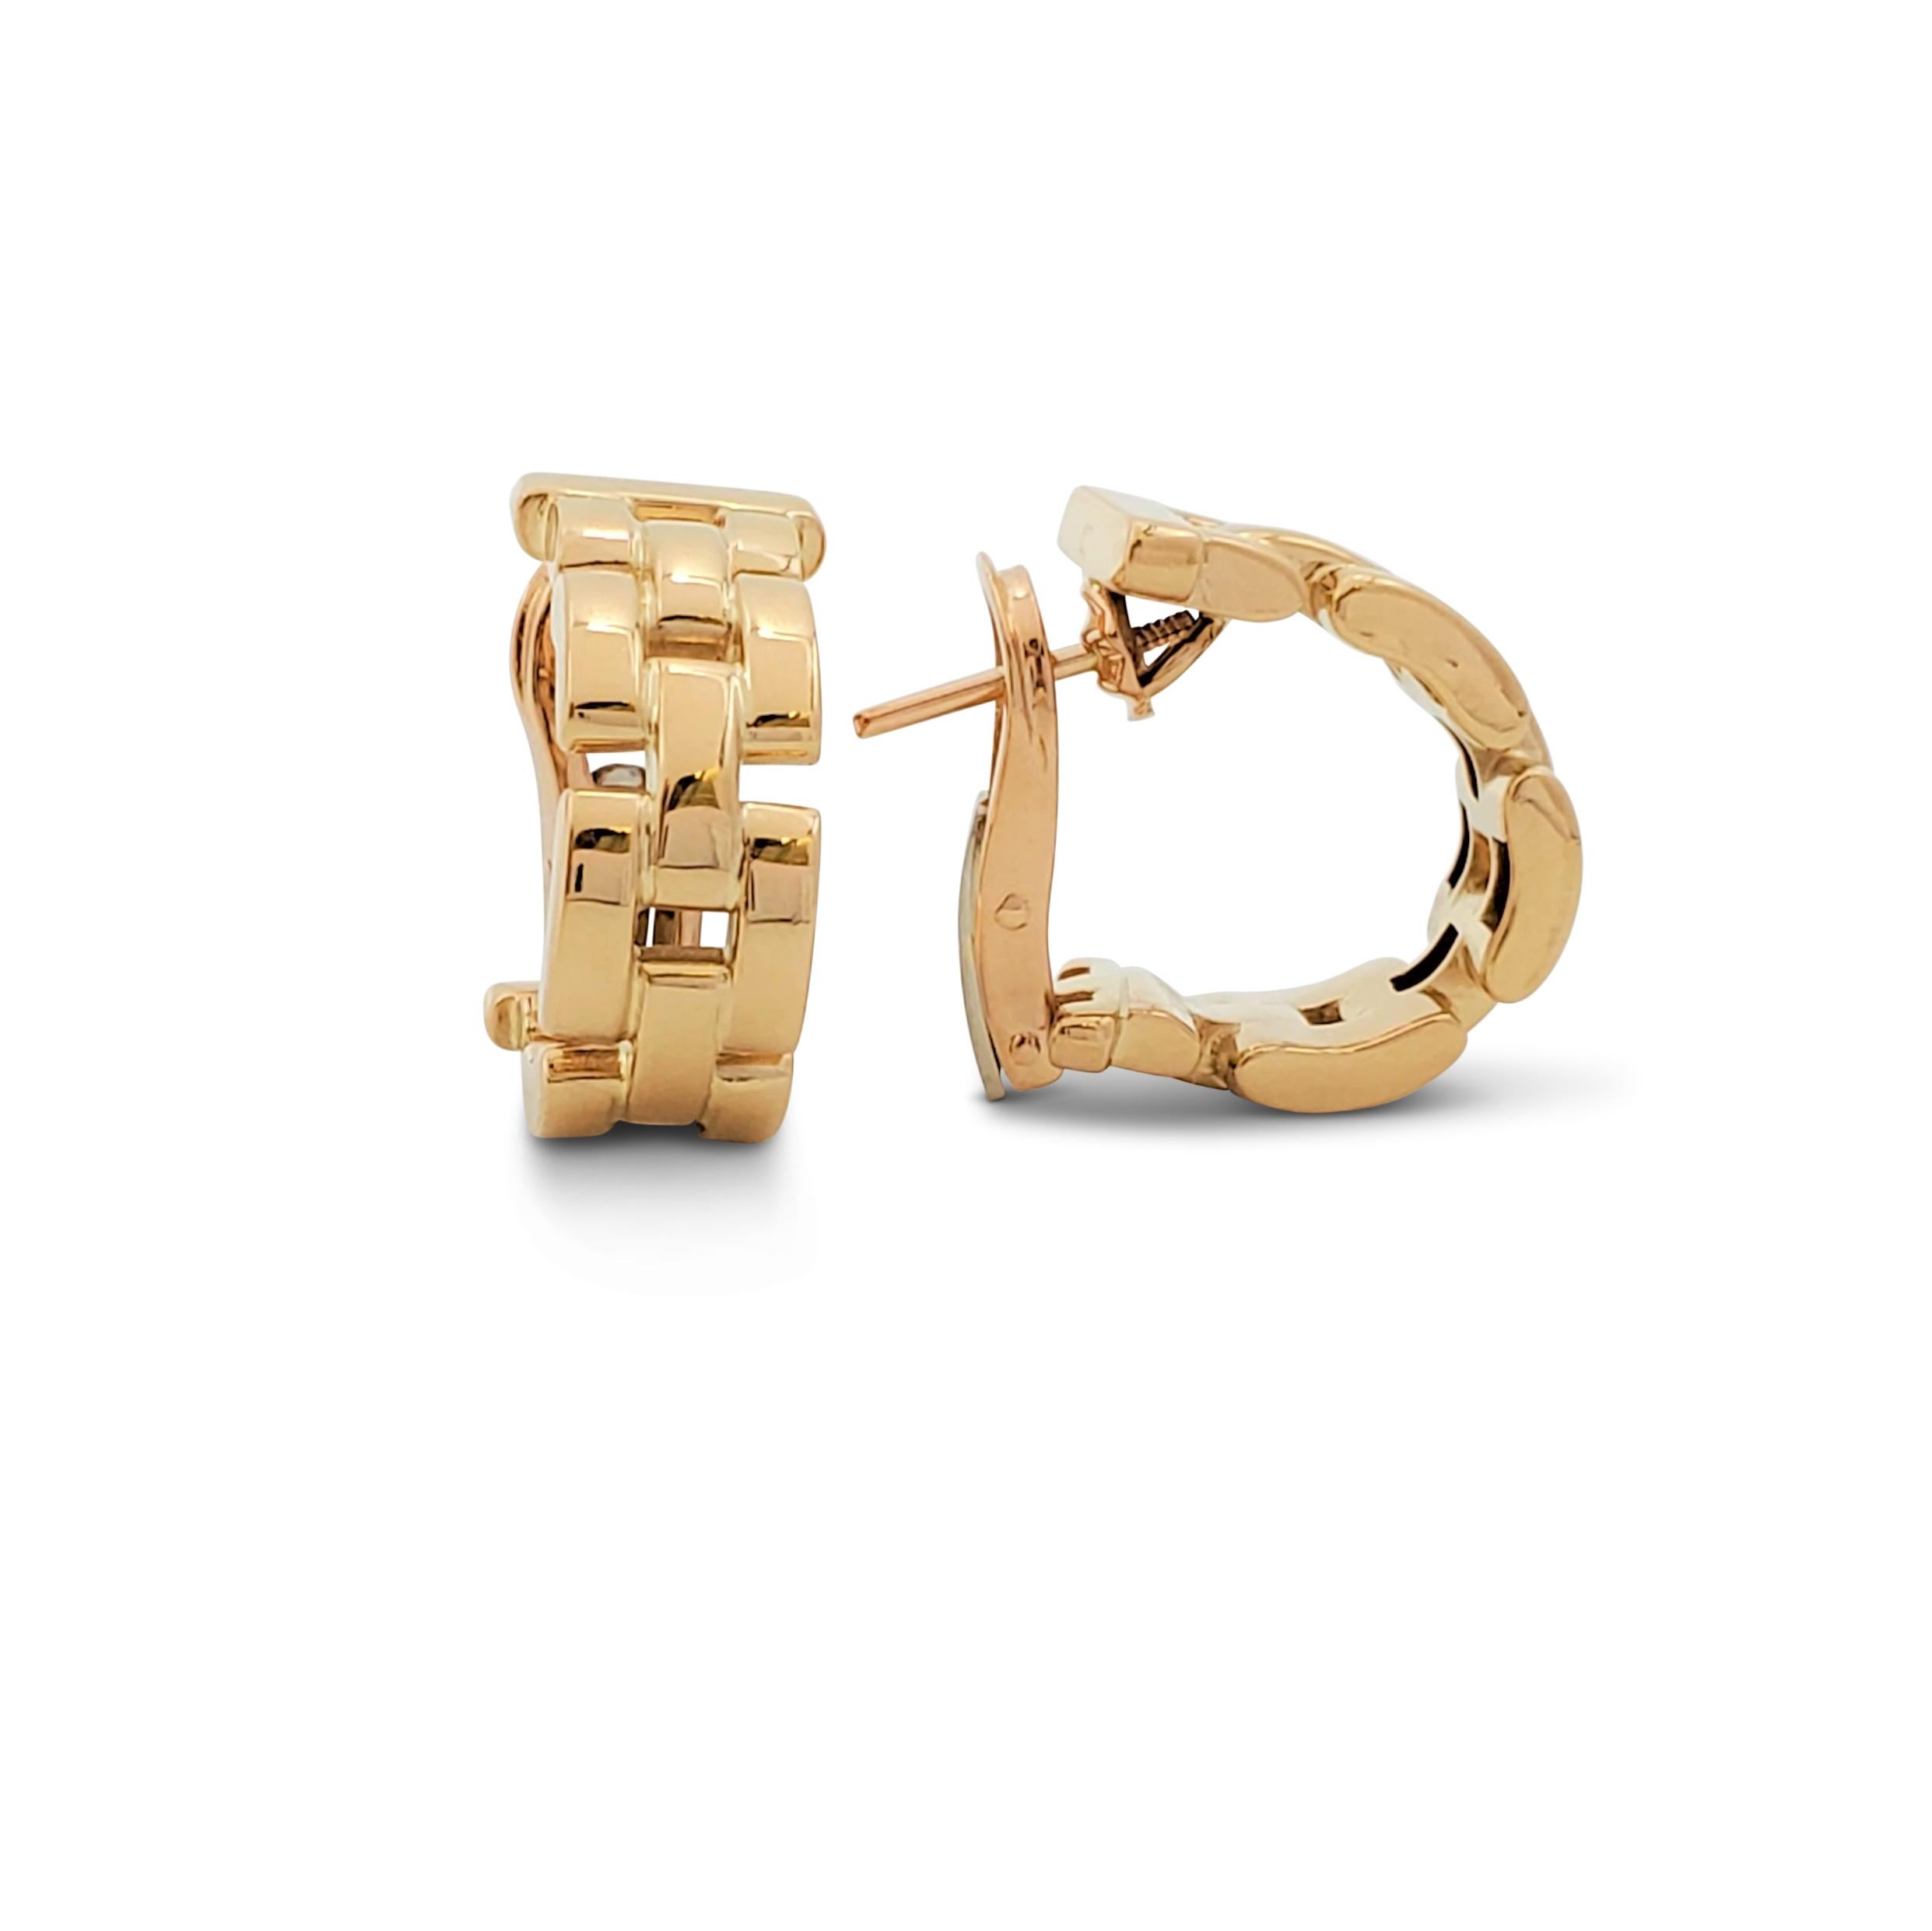 Authentic Cartier Maillon Panthère earrings crafted in 18 karat yellow are composed of three rows of iconic flat links in a half hoop design. Signed Cartier, 750, 1992, with serial number and hallmarks. Presented with the original Cartier box and